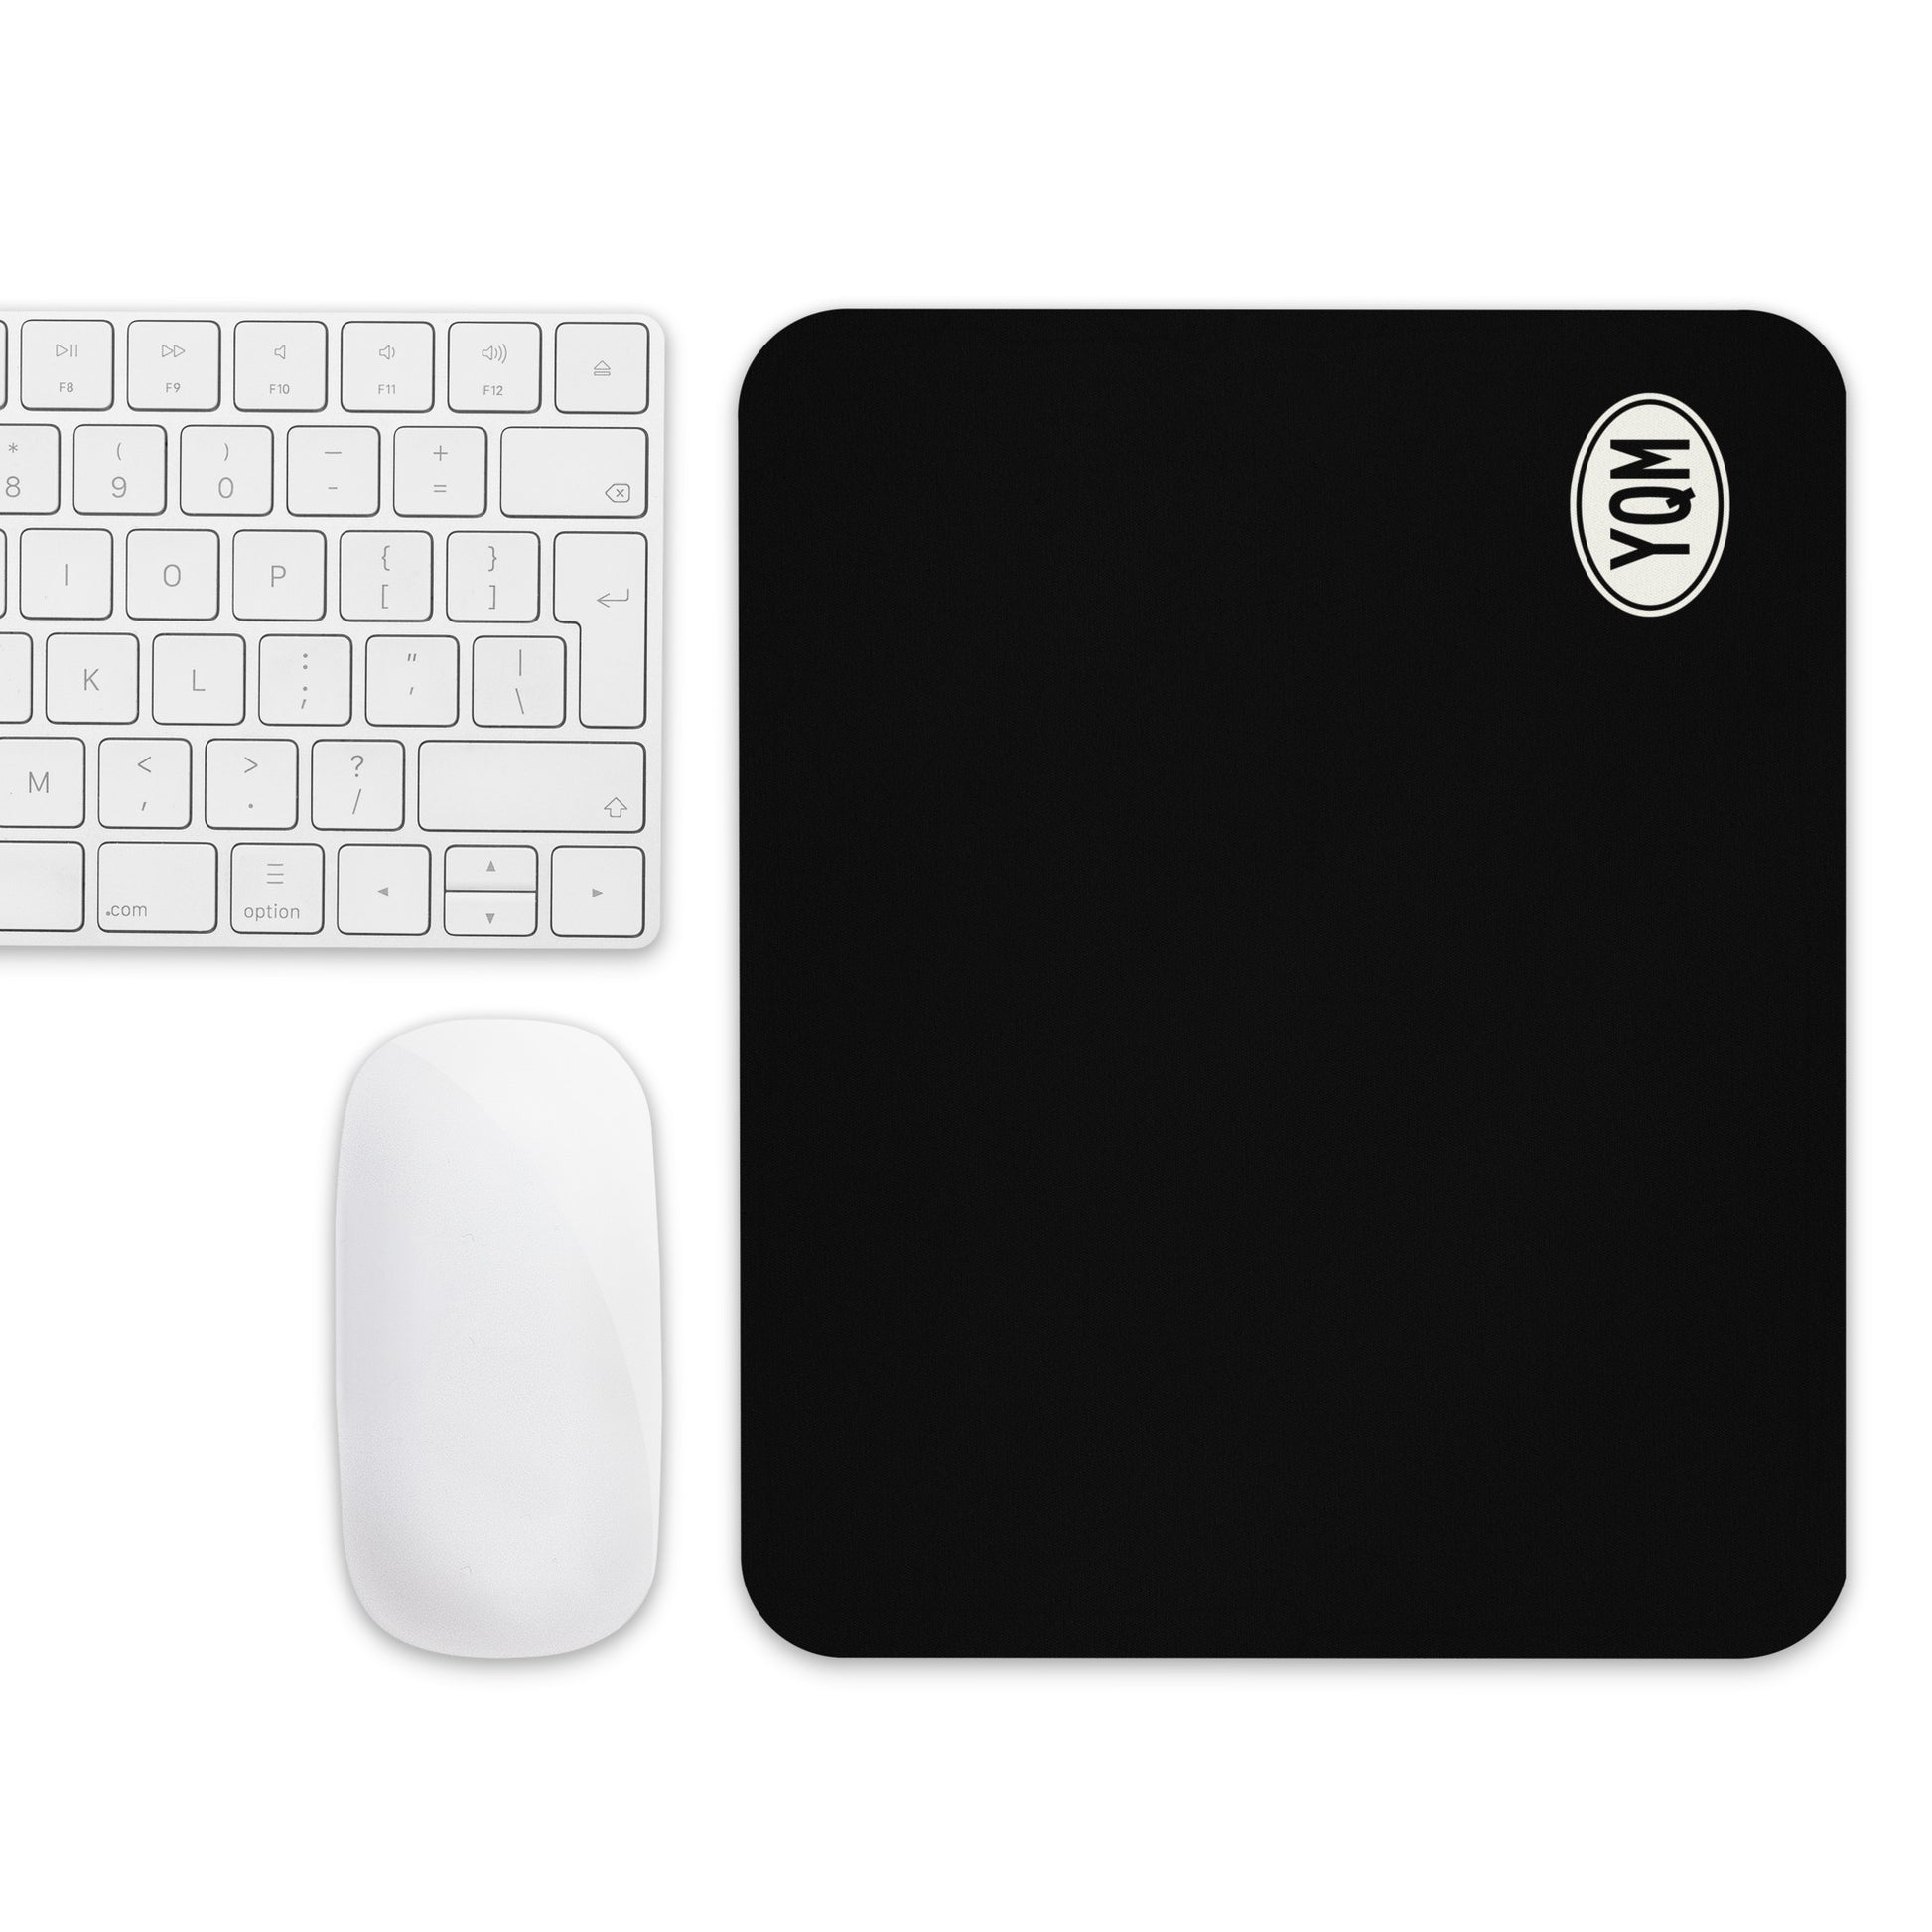 Unique Travel Gift Mouse Pad - White Oval • YQM Moncton • YHM Designs - Image 04